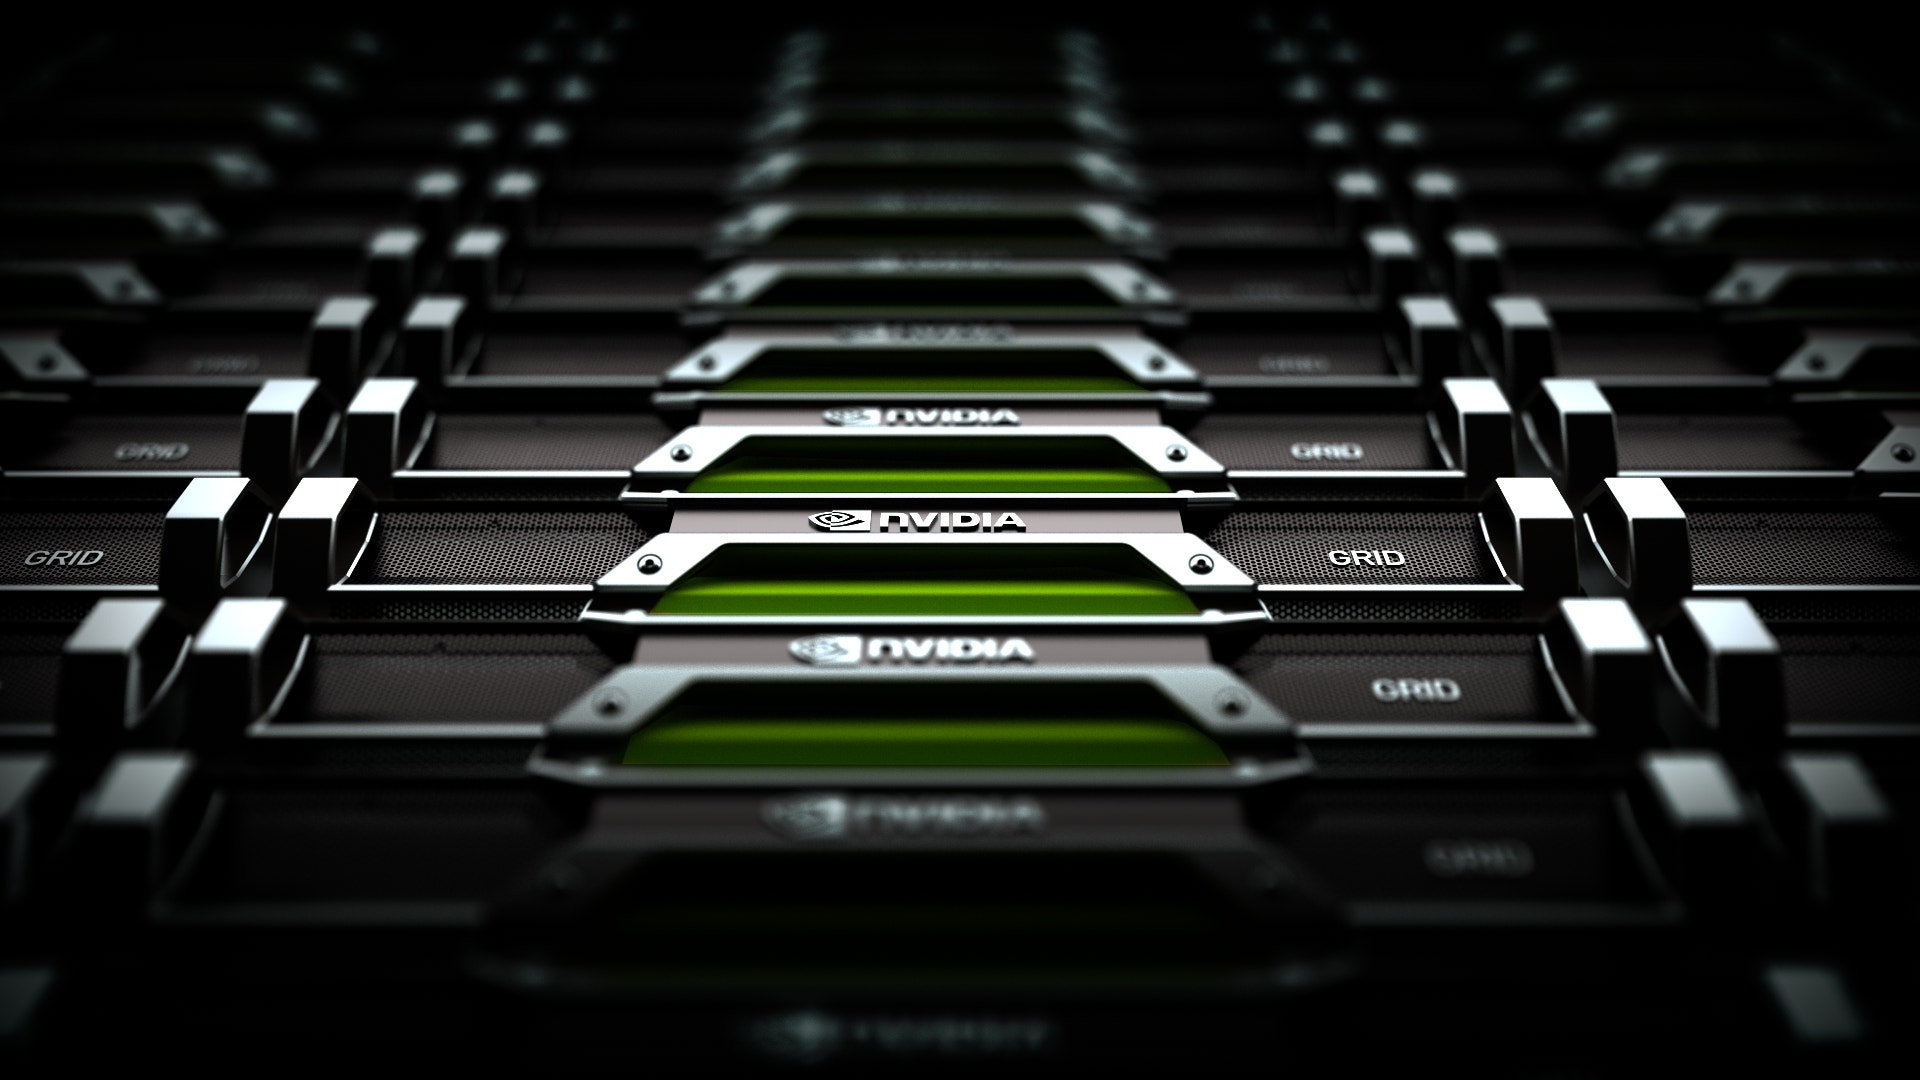 Why Nvidia Stock Is Rising Today